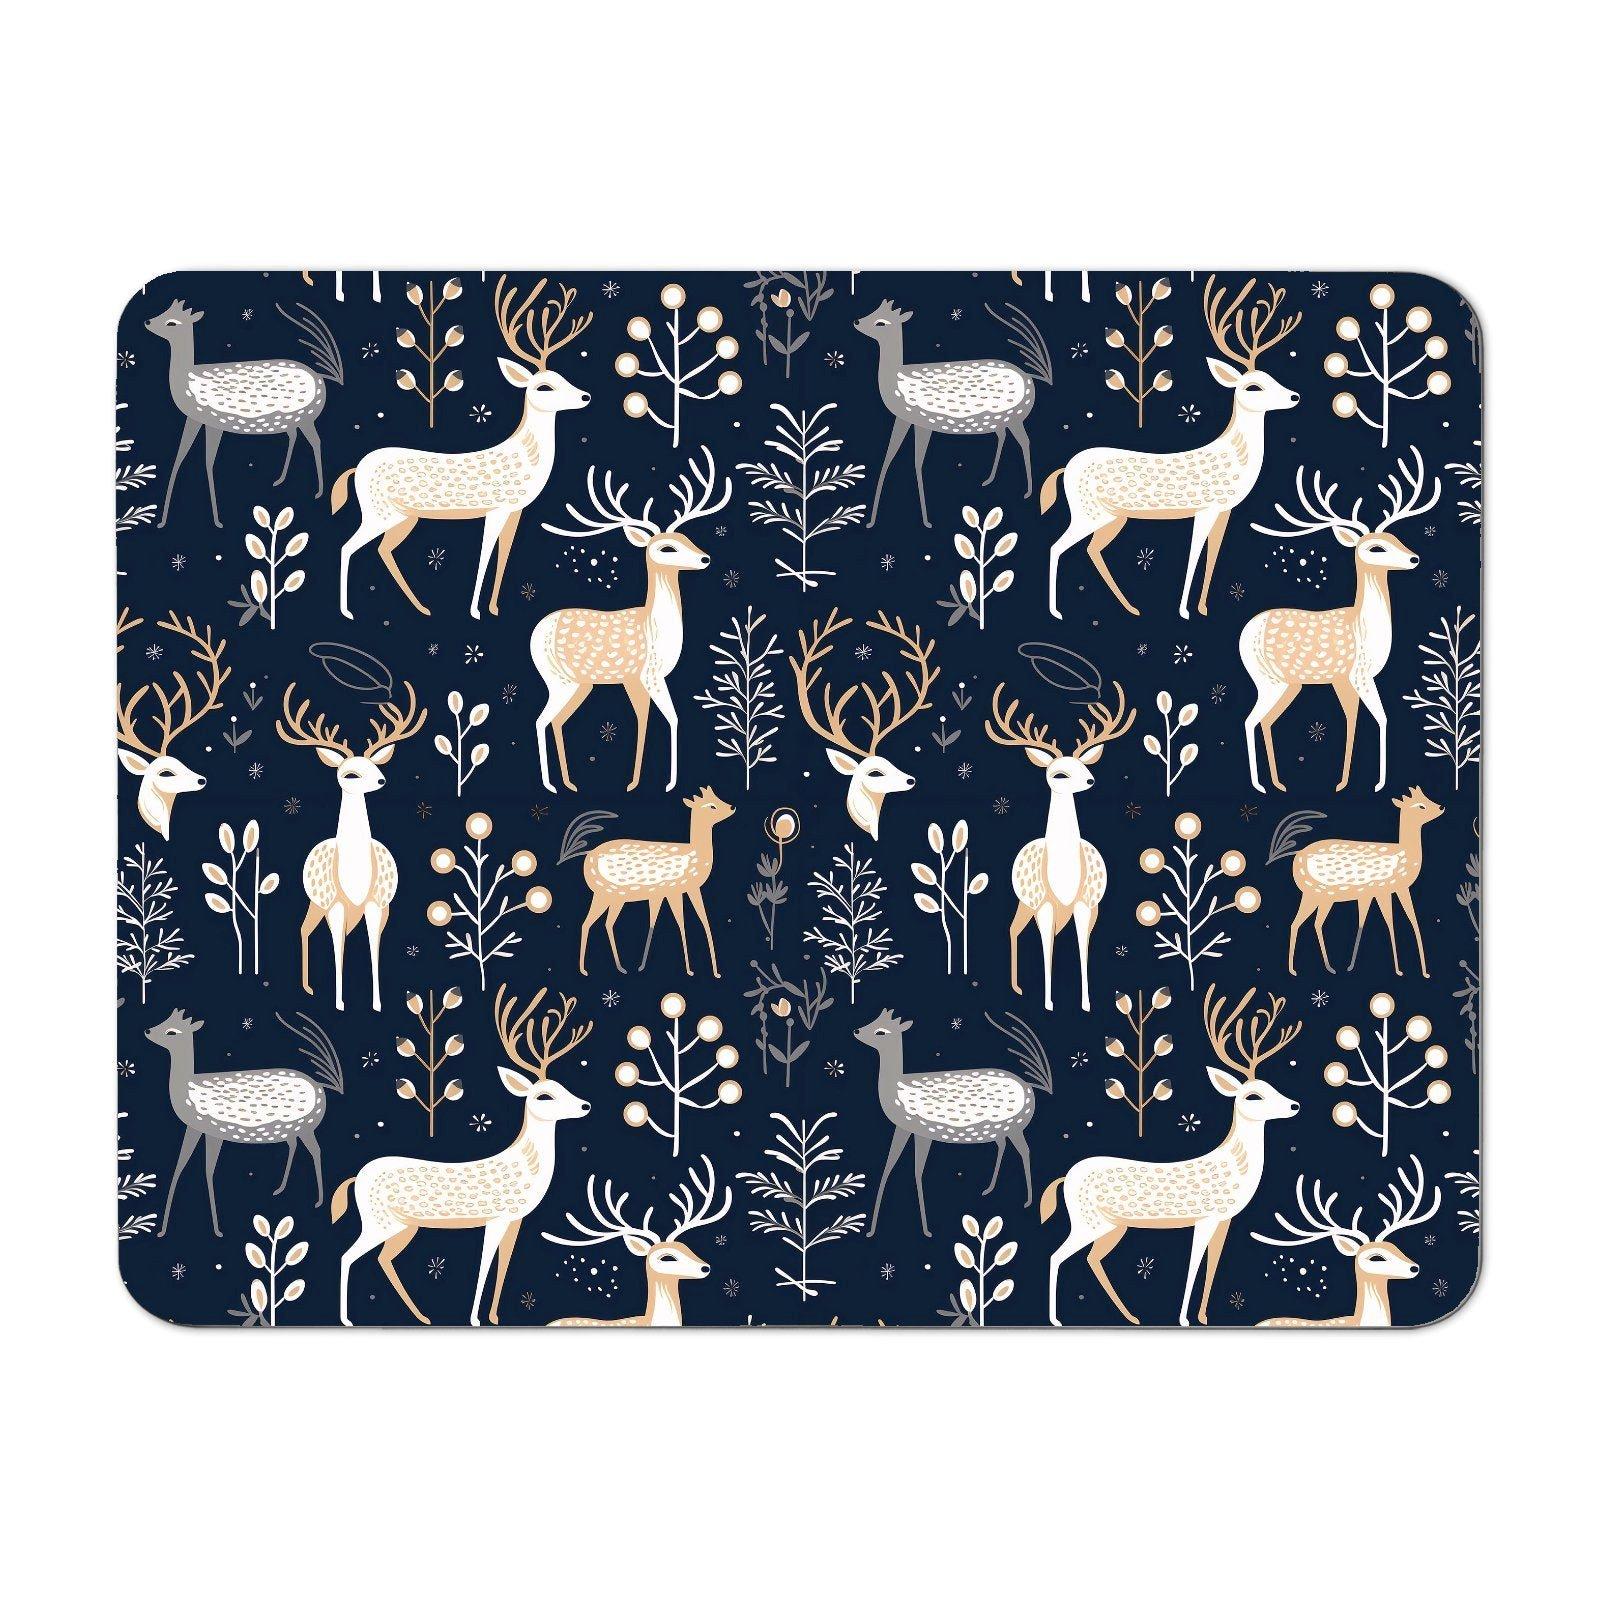 Reindeer, Whimsical, Illustration Pattern Placemats